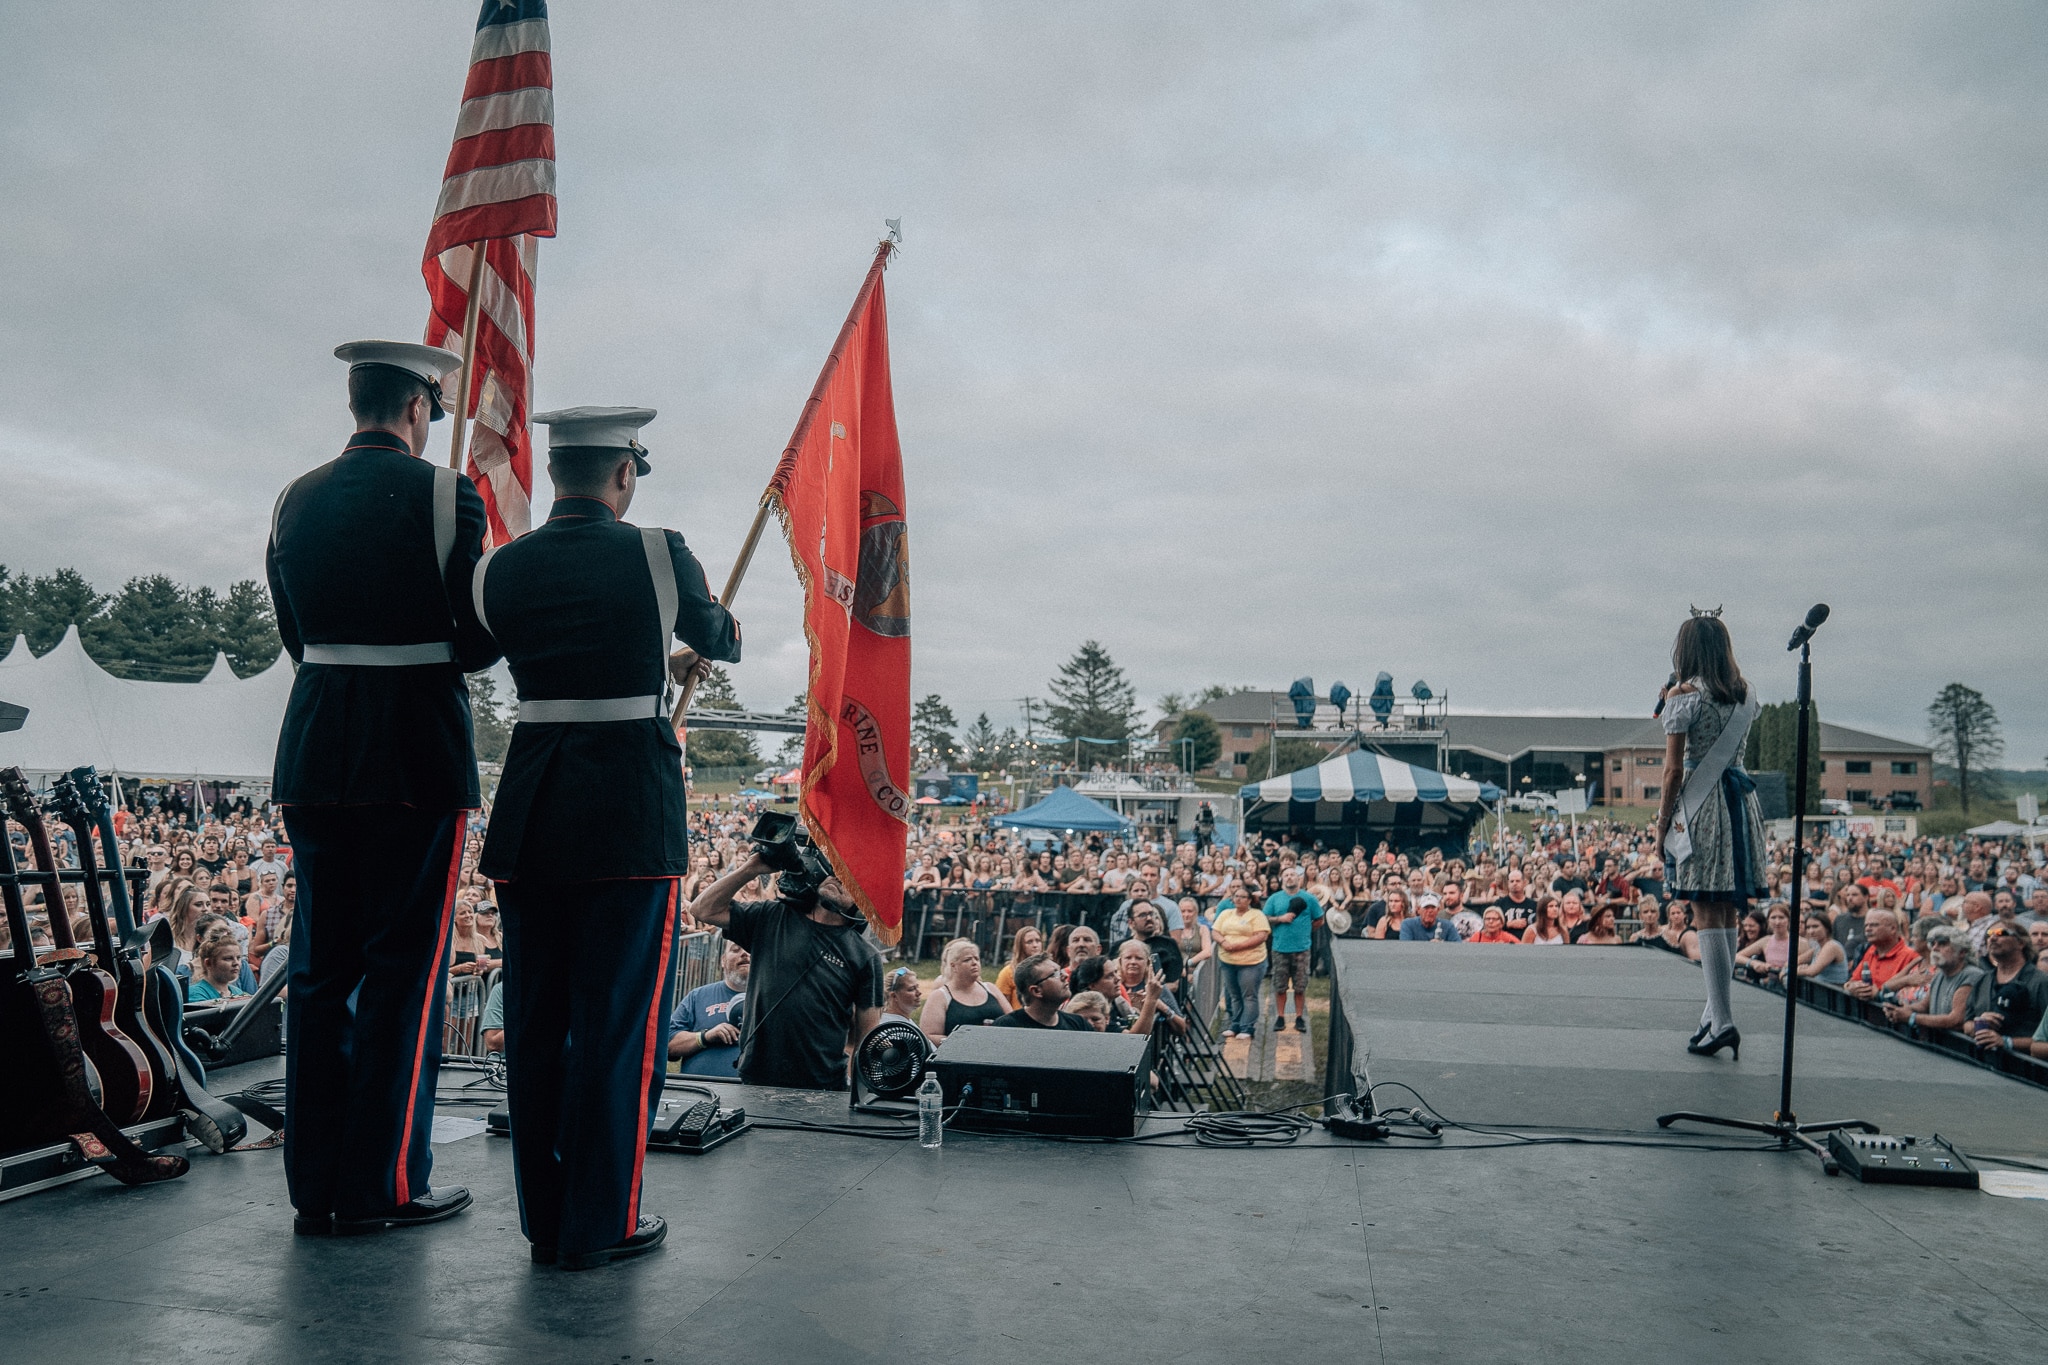 Military men on stage holding United States flags in front of a crowd of country music fans